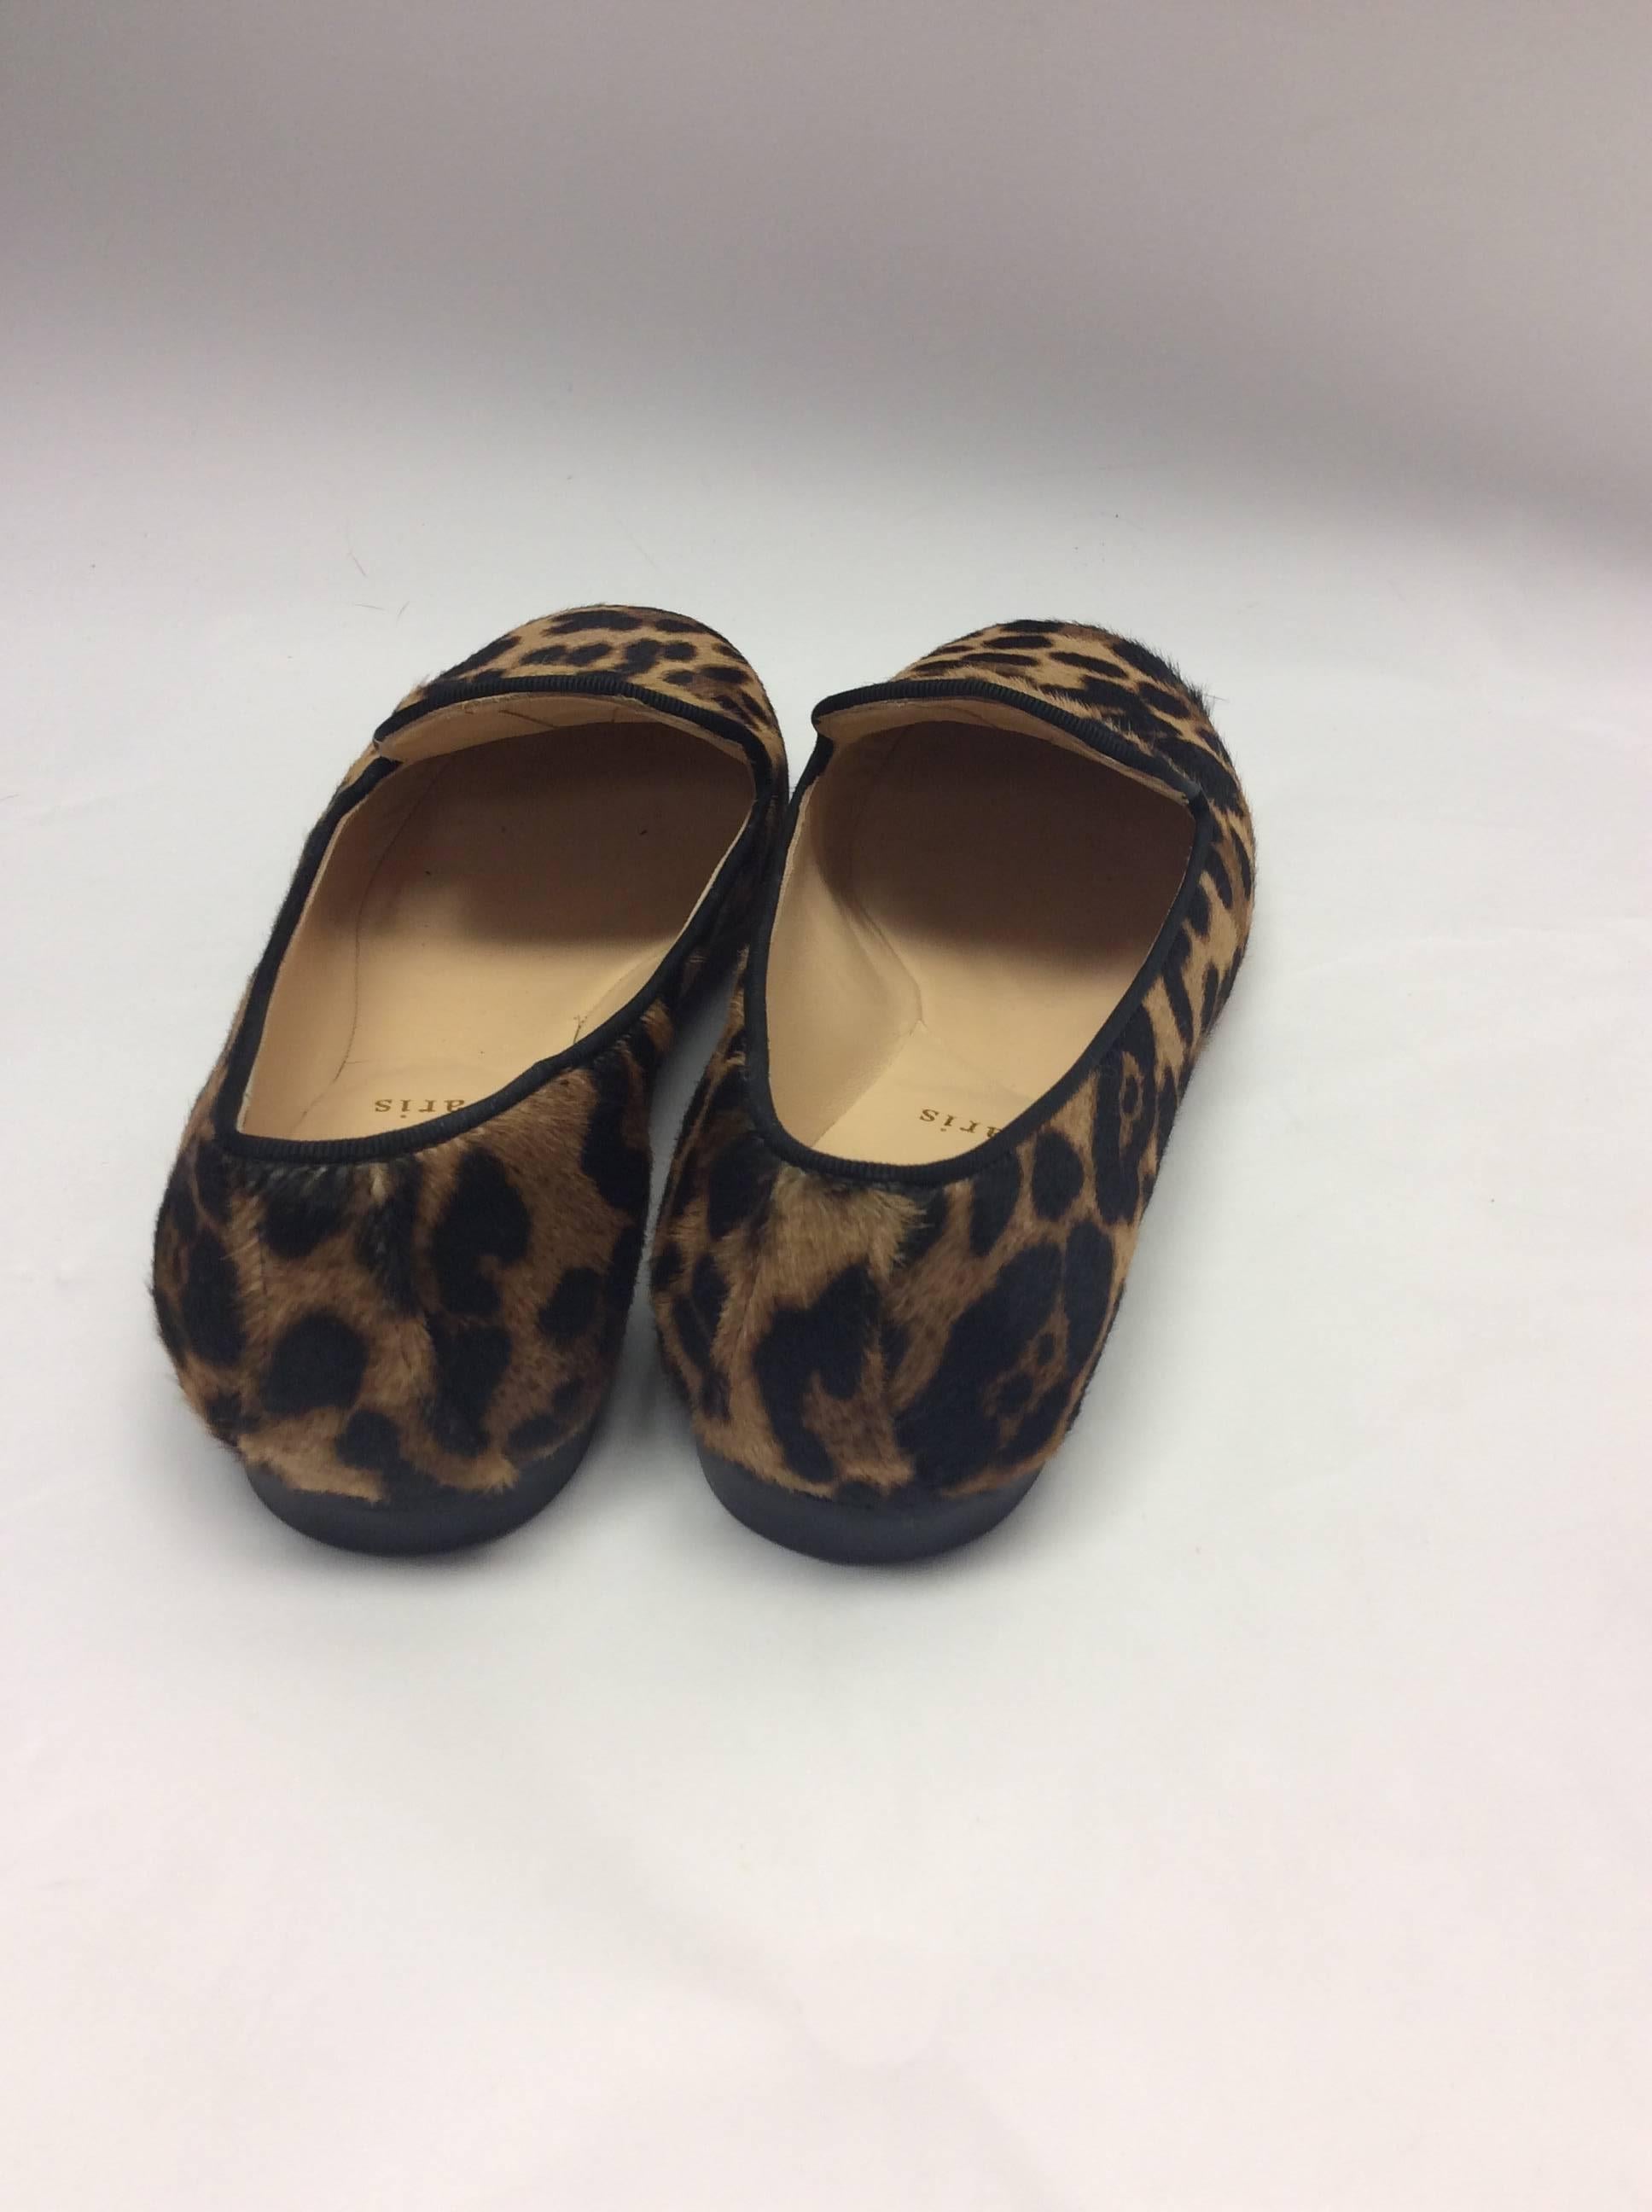 Christian Louboutin Leopard Loafers
Pony hair
Size 37.5
$199
Made in Italy